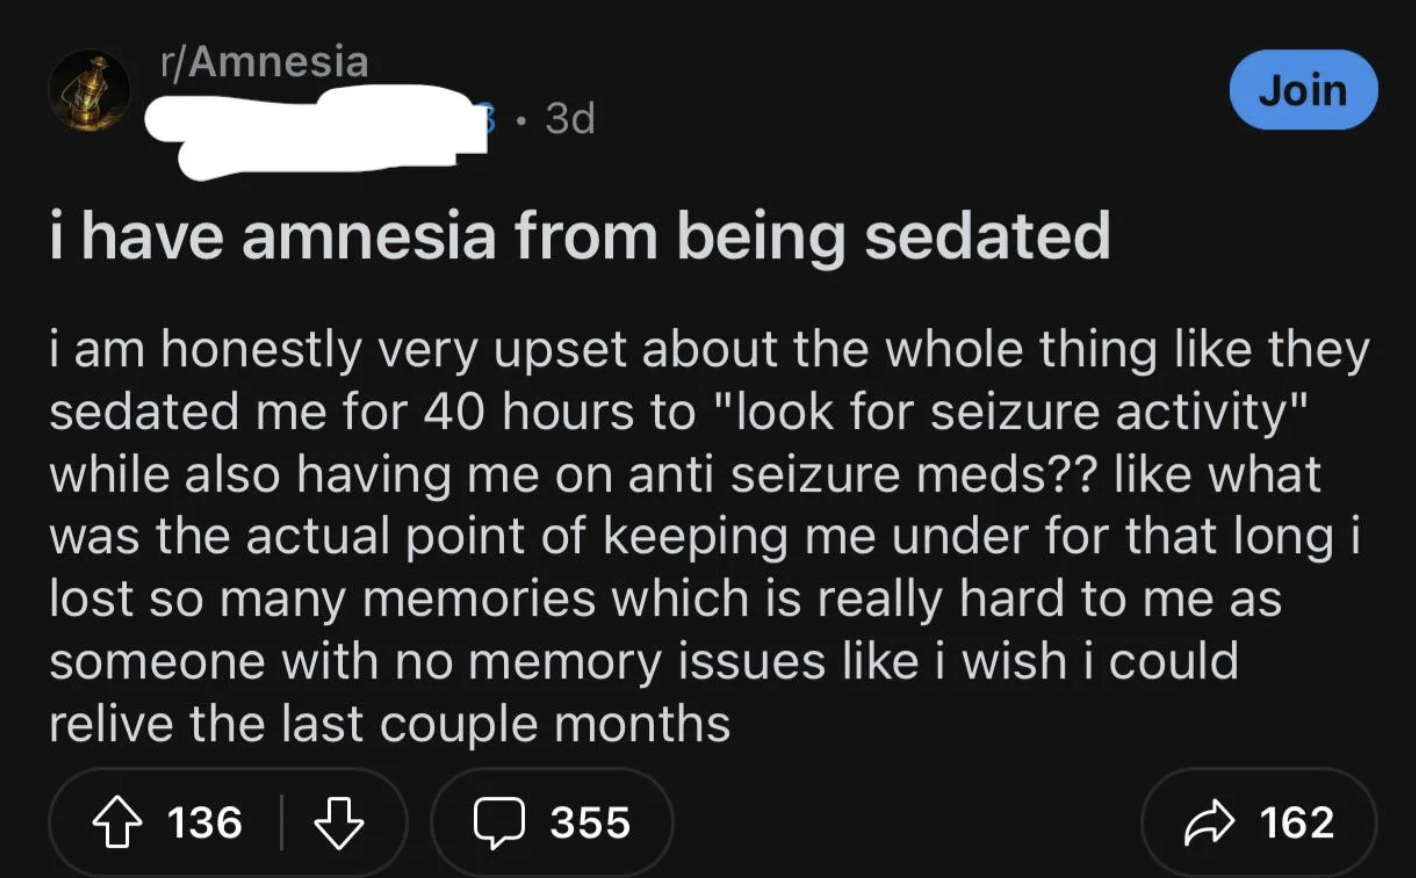 screenshot - rAmnesia 3d Join i have amnesia from being sedated i am honestly very upset about the whole thing they sedated me for 40 hours to "look for seizure activity" while also having me on anti seizure meds?? what was the actual point of keeping me 